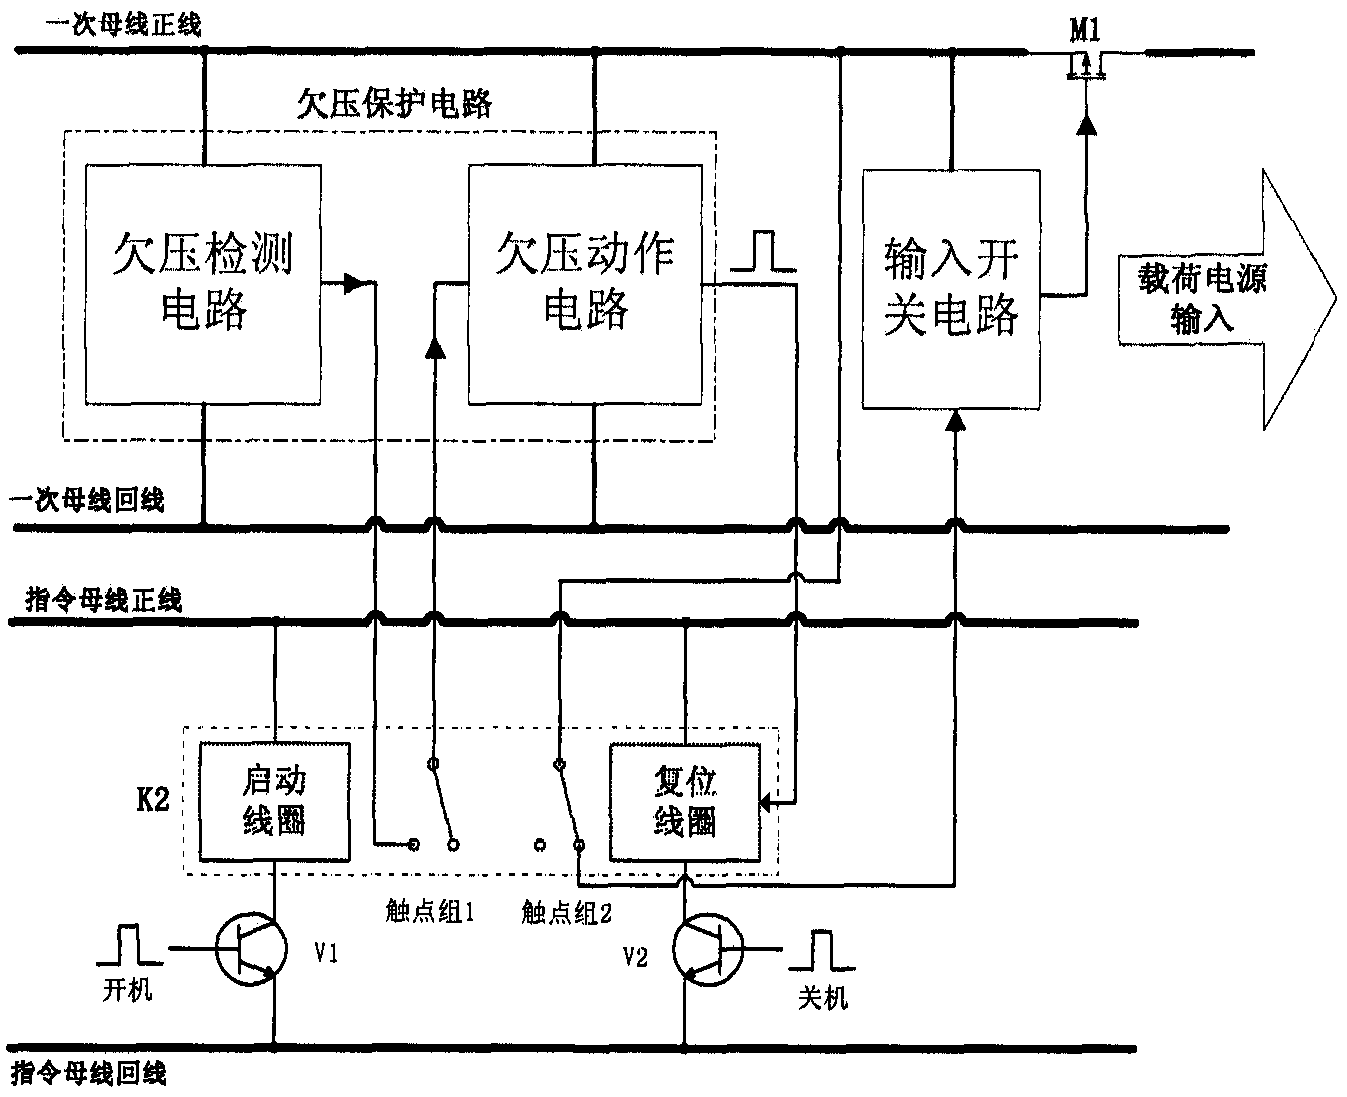 A satellite load power supply undervoltage protection control circuit